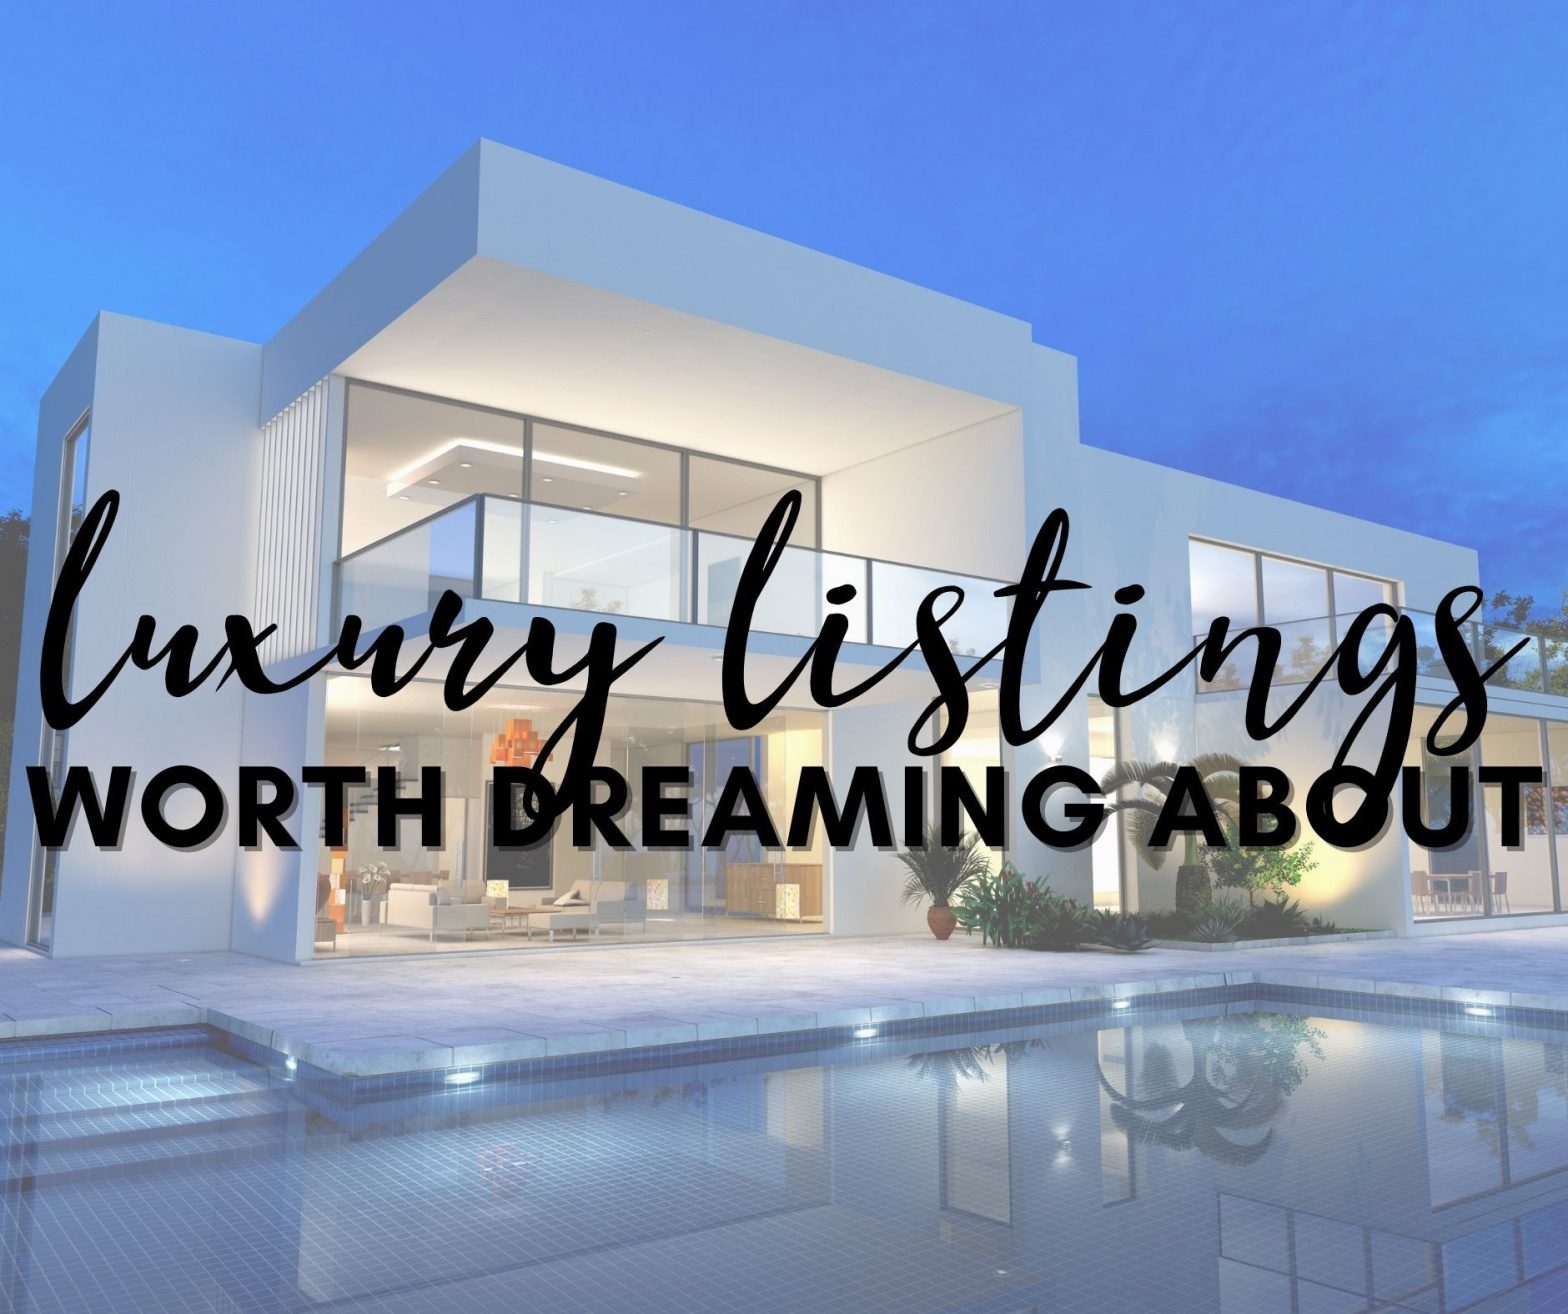 Luxury listings worth dreaming about